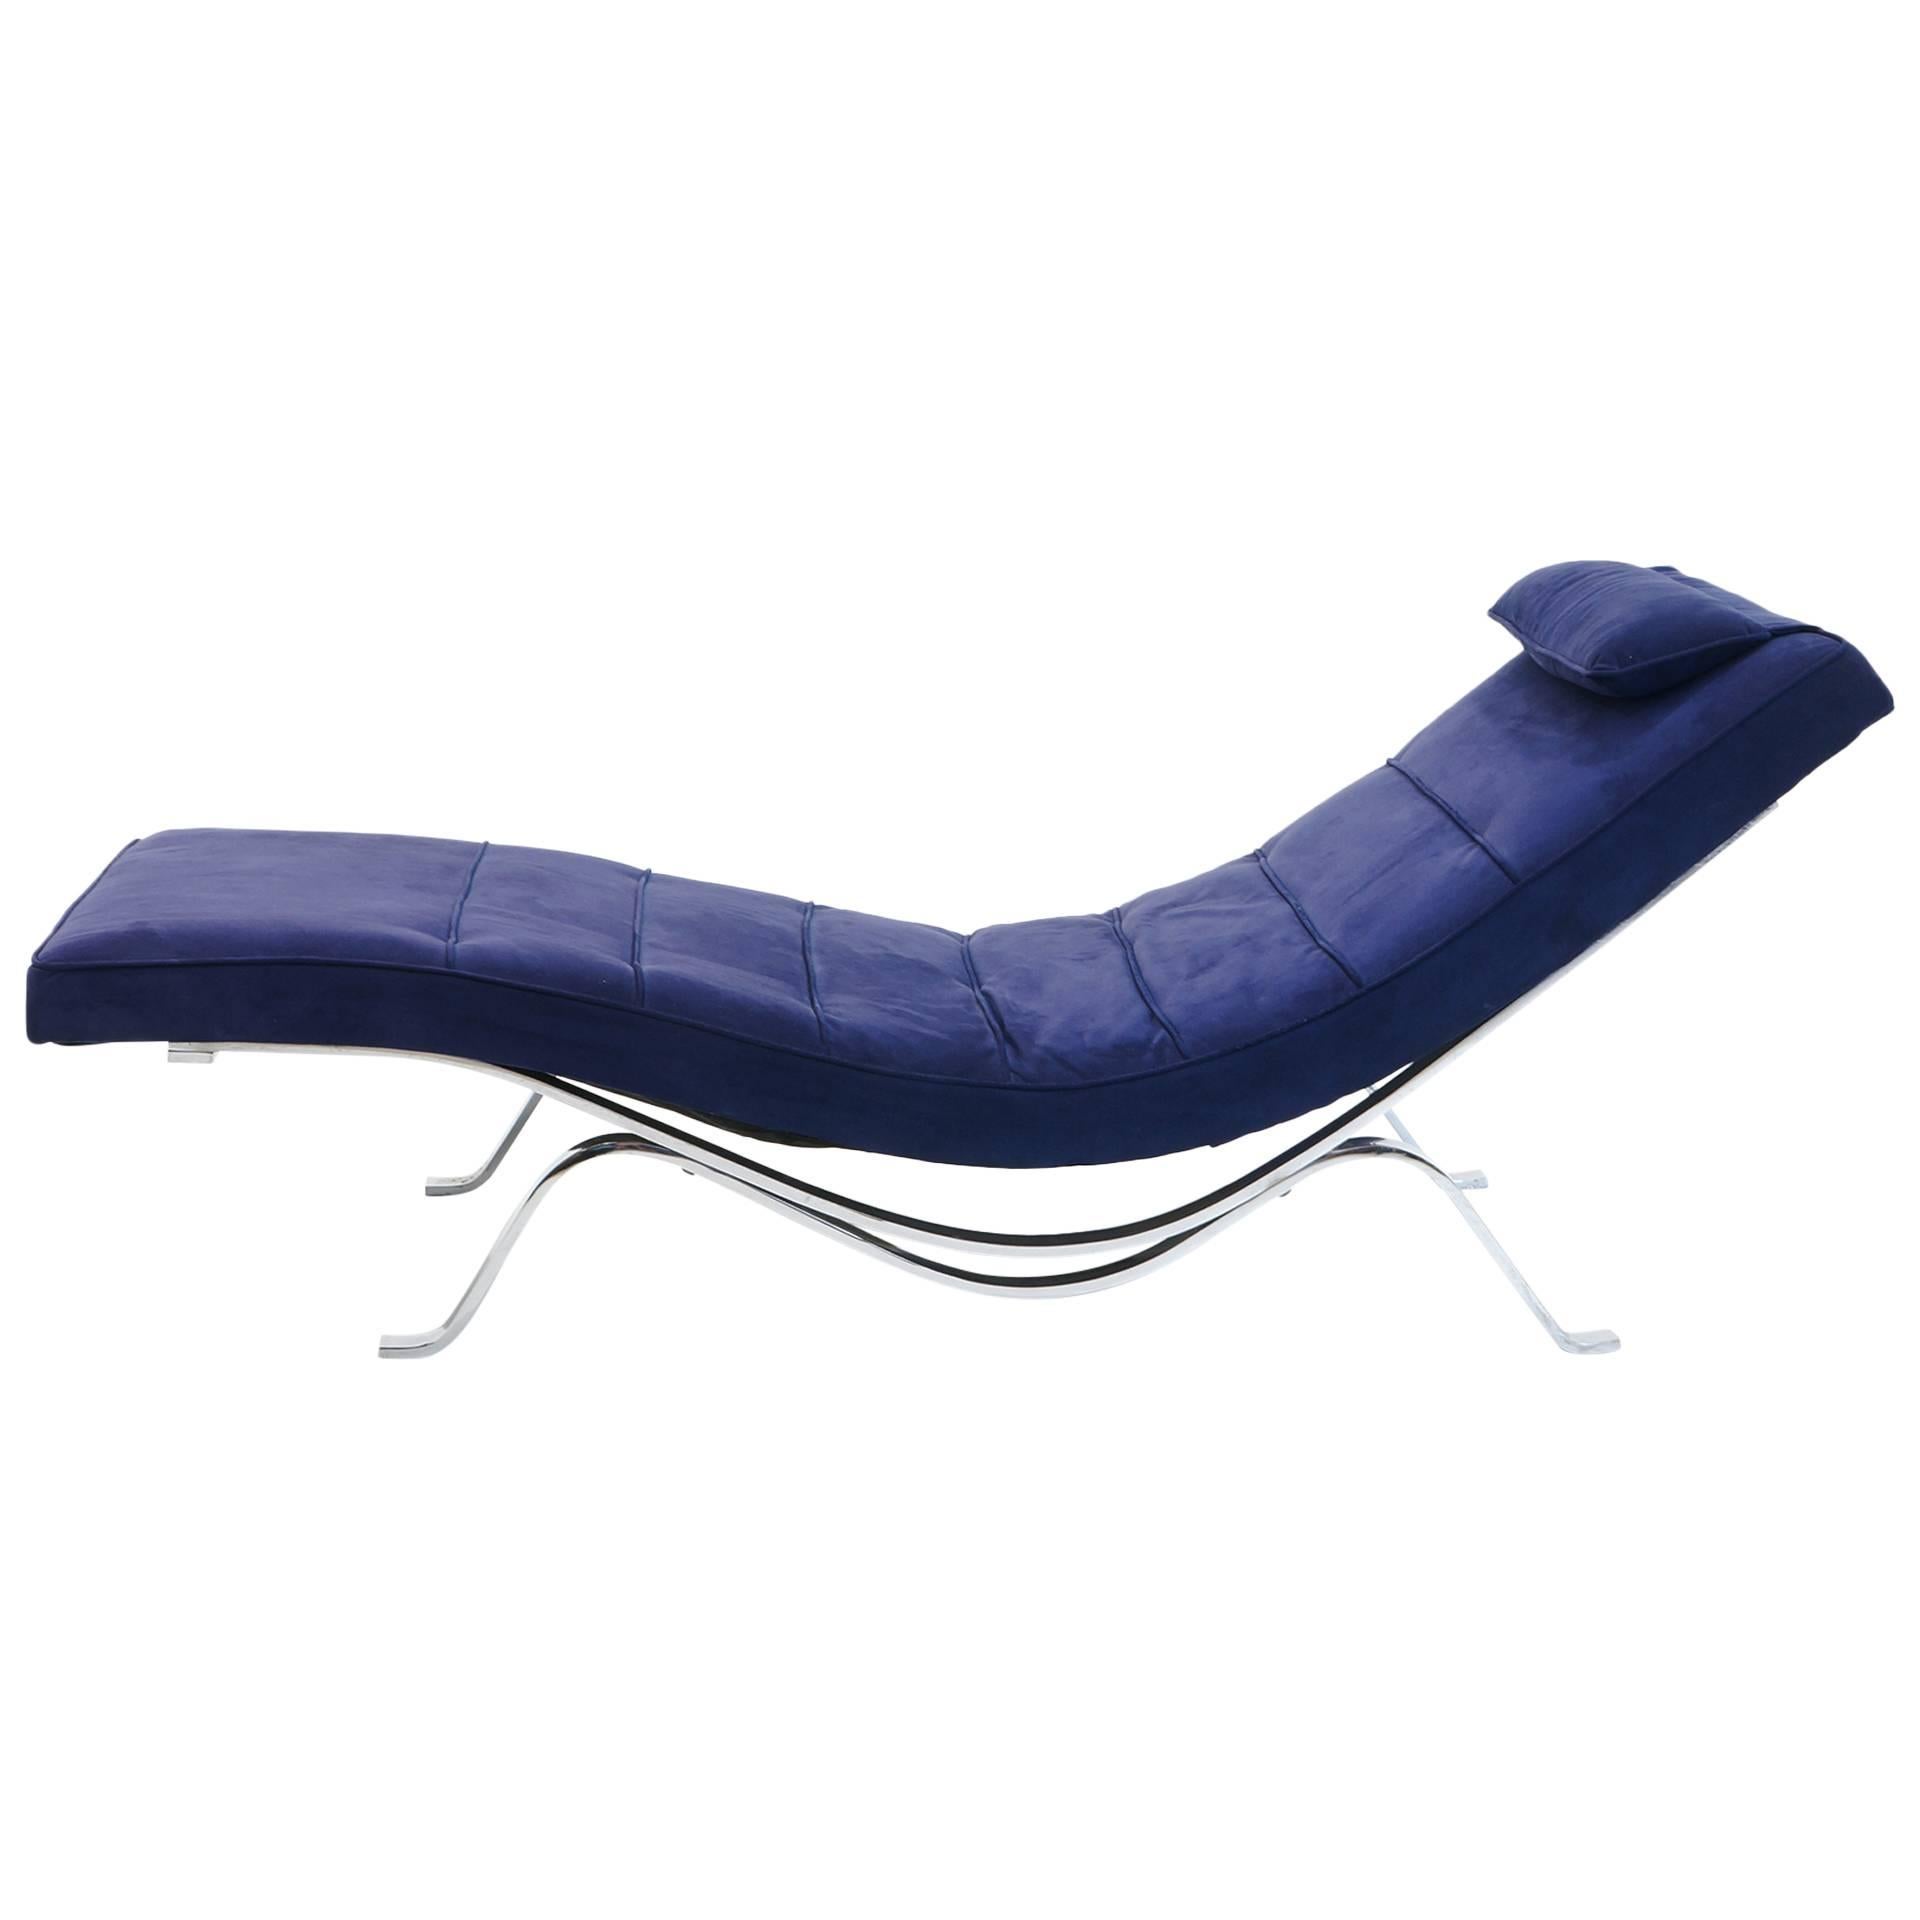 George Nelson for Herman Miller Chaise Longue For Sale